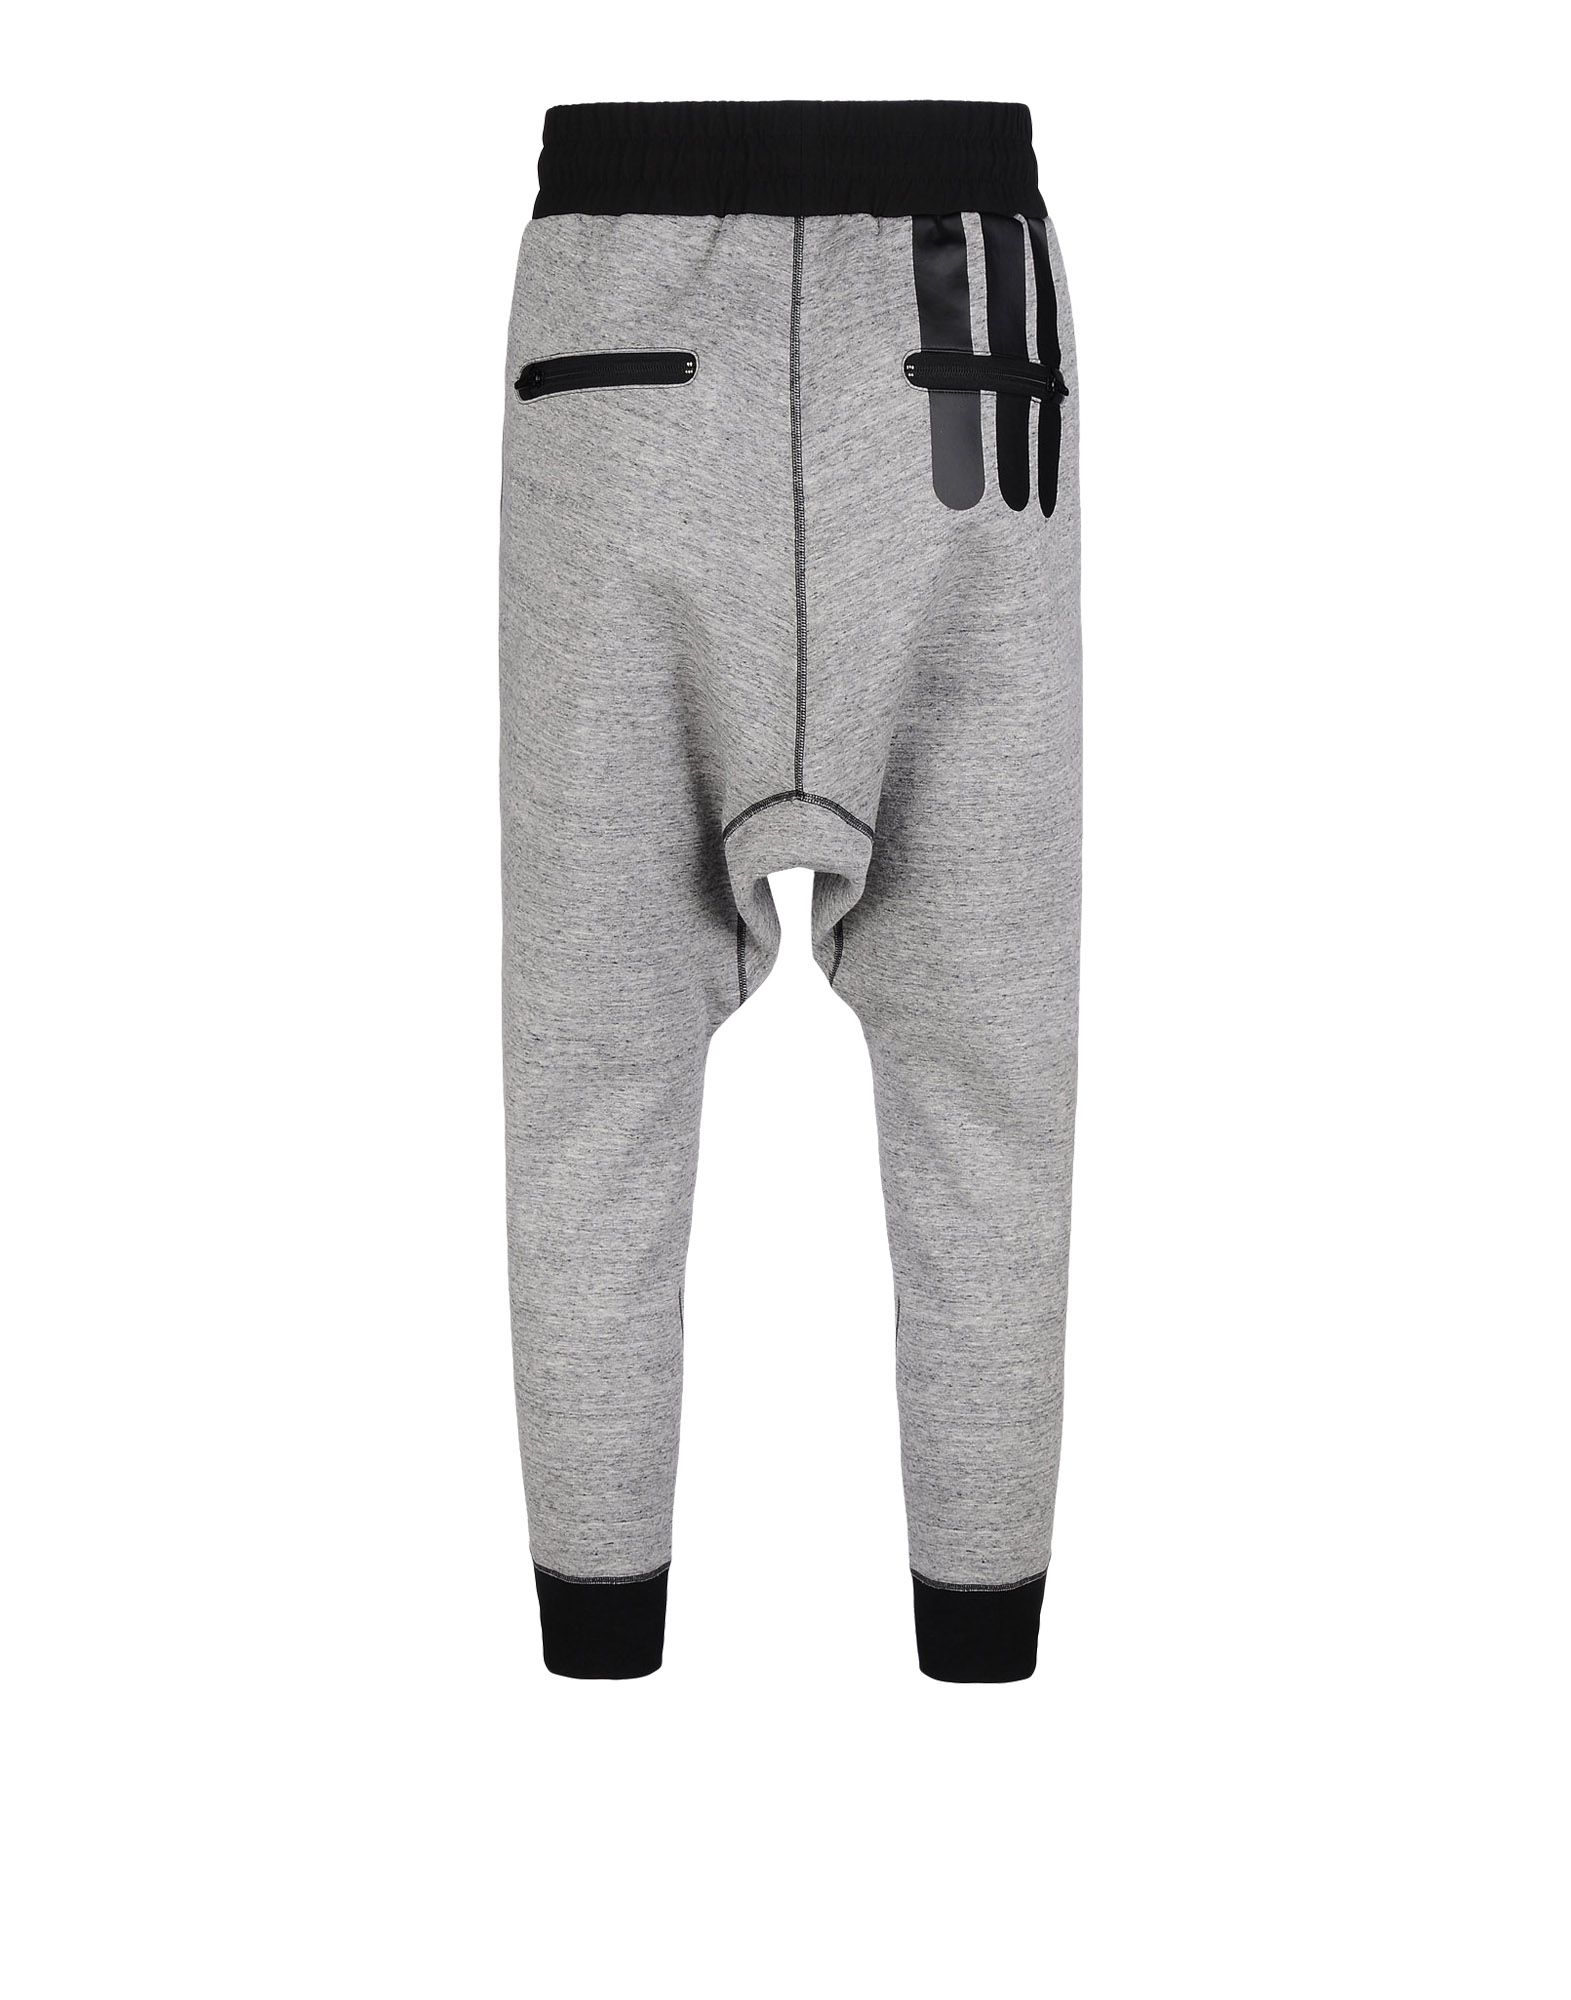 Y 3 DIGITAL PANT for Men | Adidas Y-3 Official Store